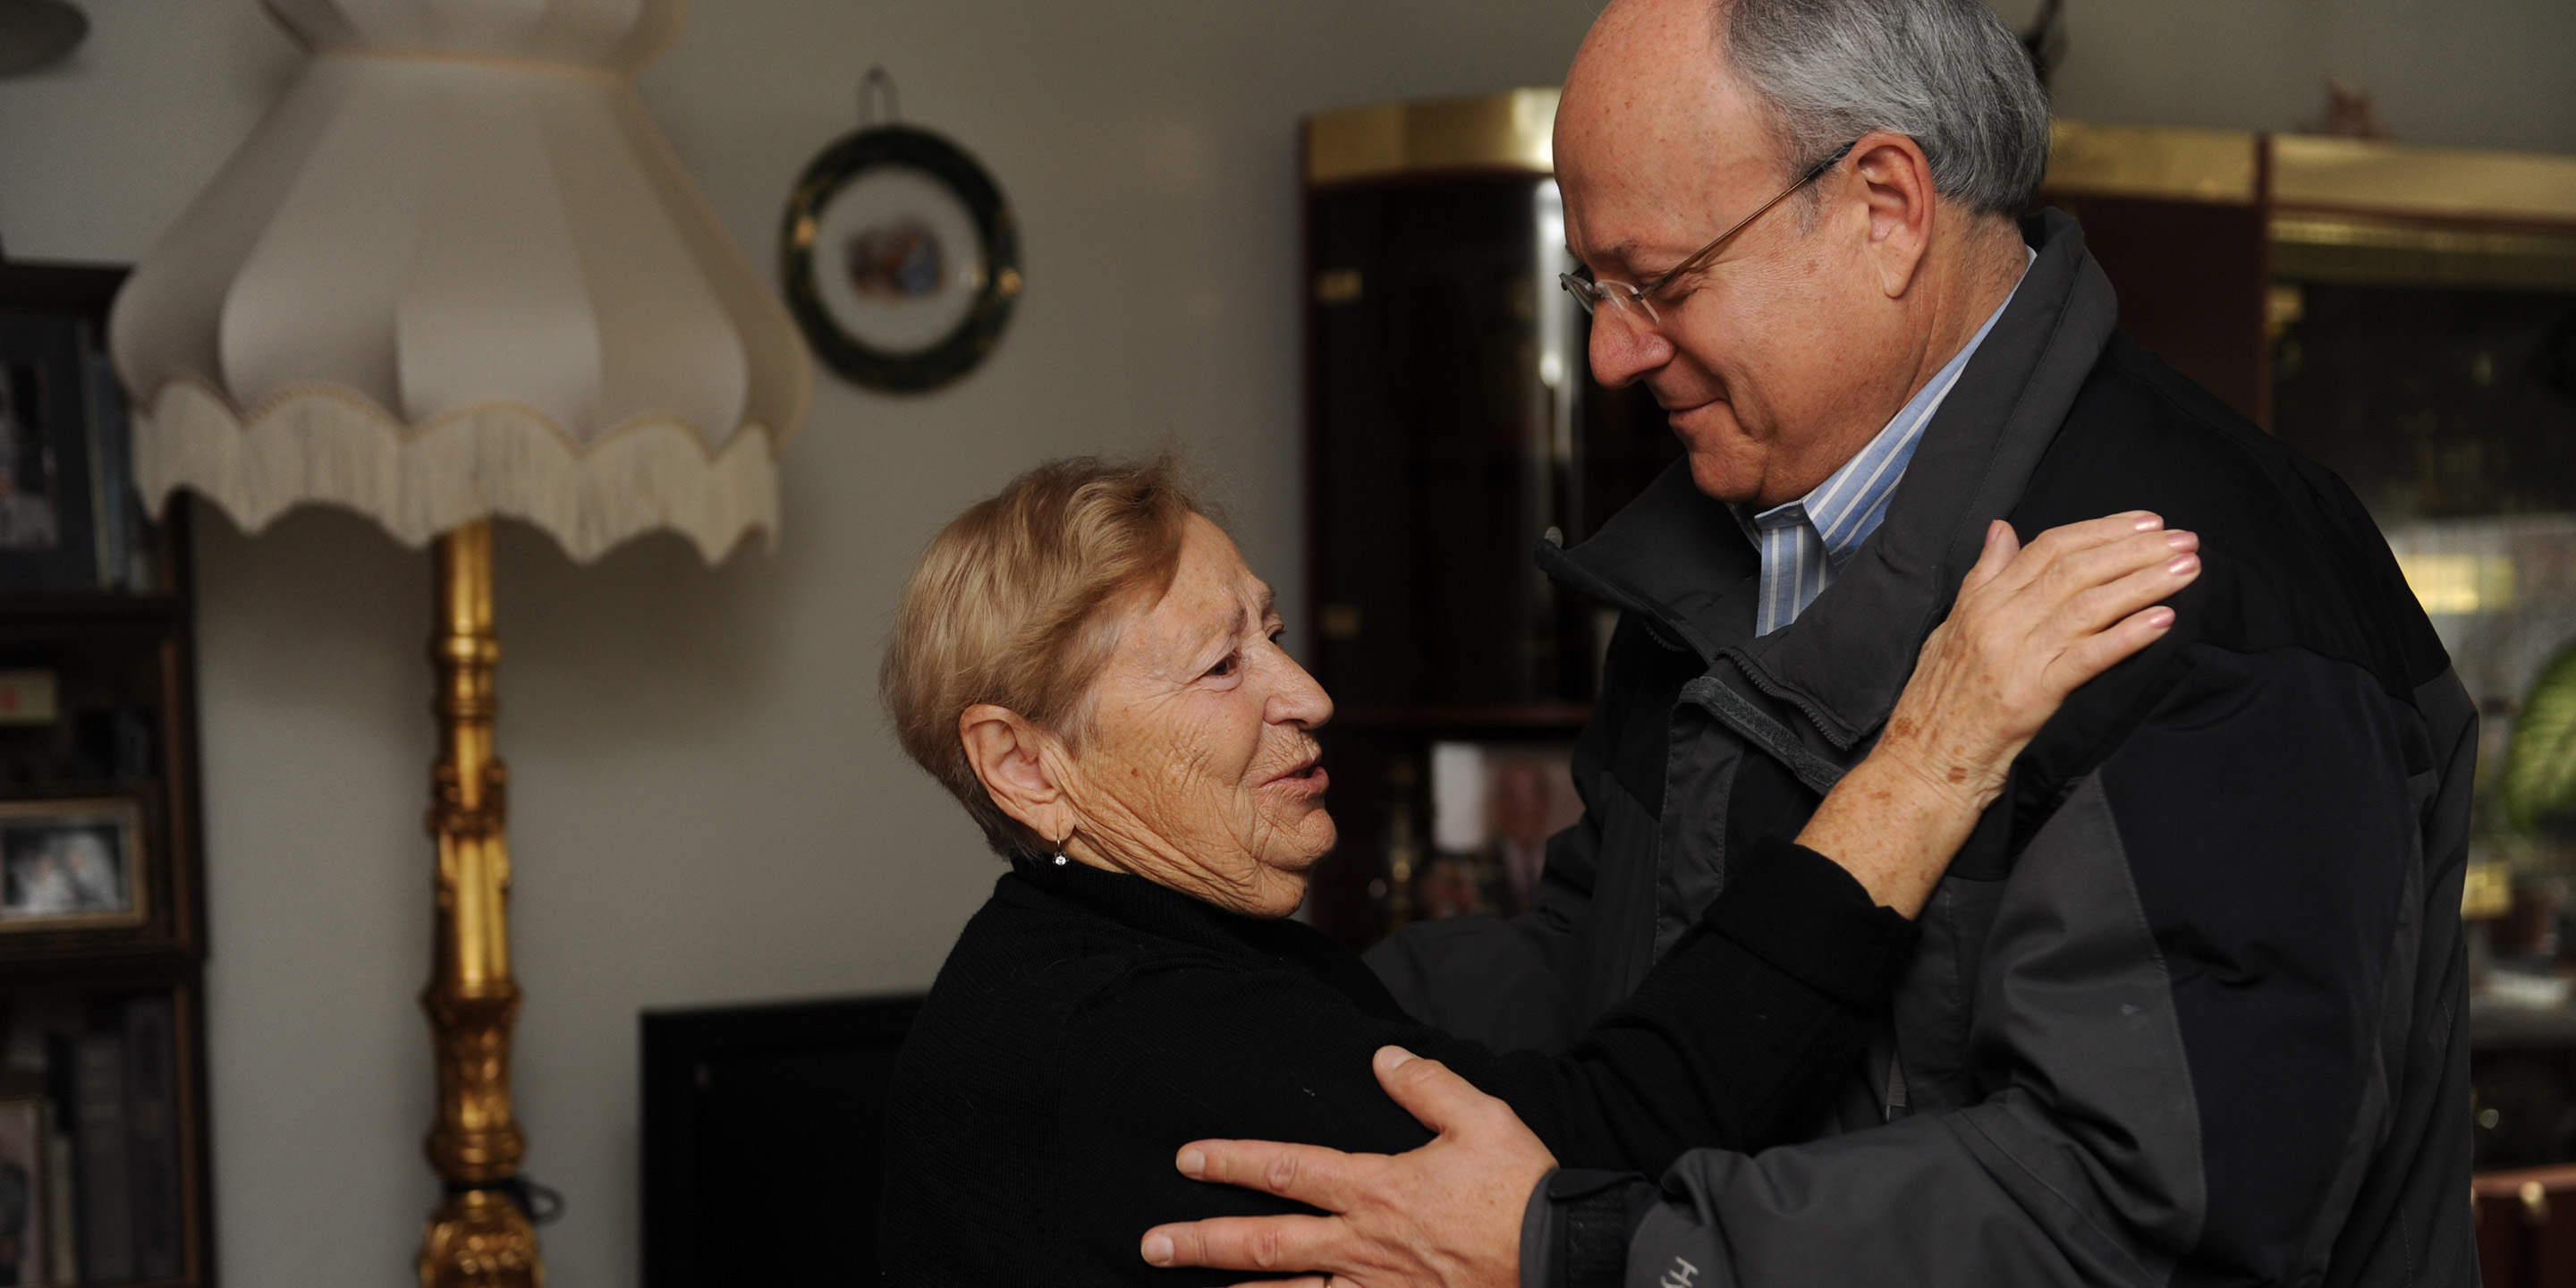 Hebrew SeniorLife's CEO Lou Woolf goes in for a hug with a female senior 